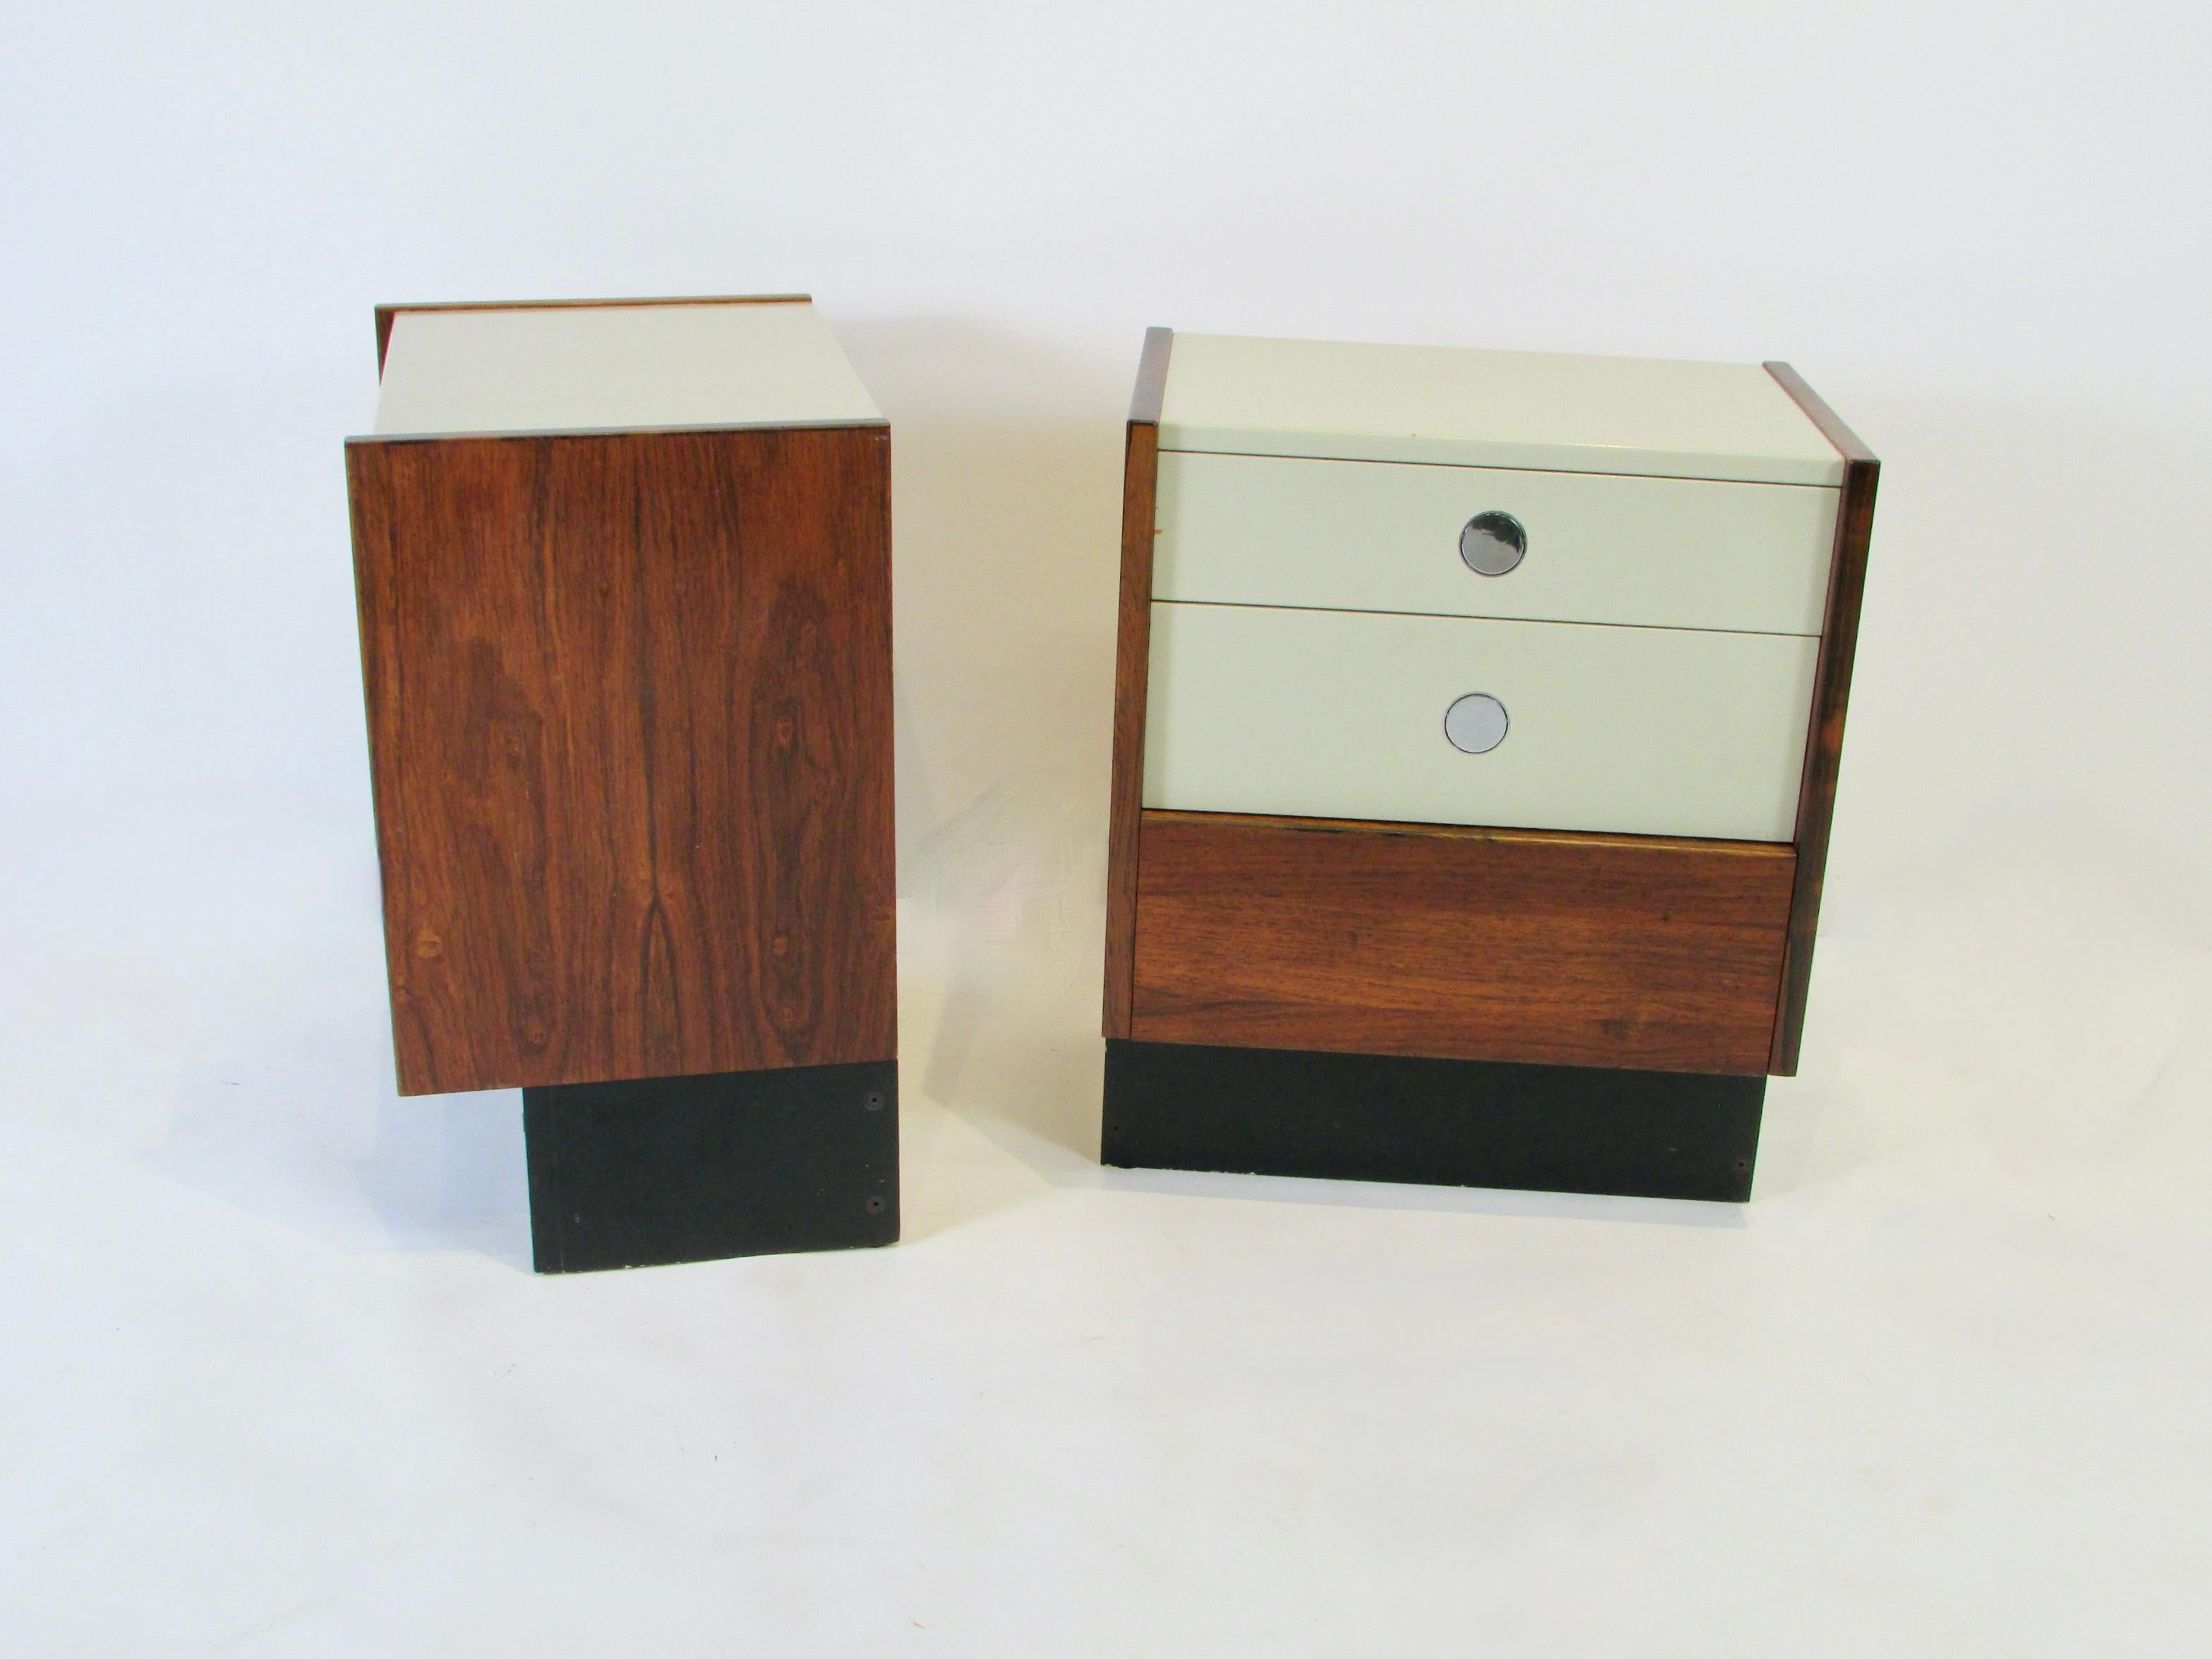 Danish Pair of Drylund Denmark Lacquered Drawer Rosewood Cabinet Night Stands